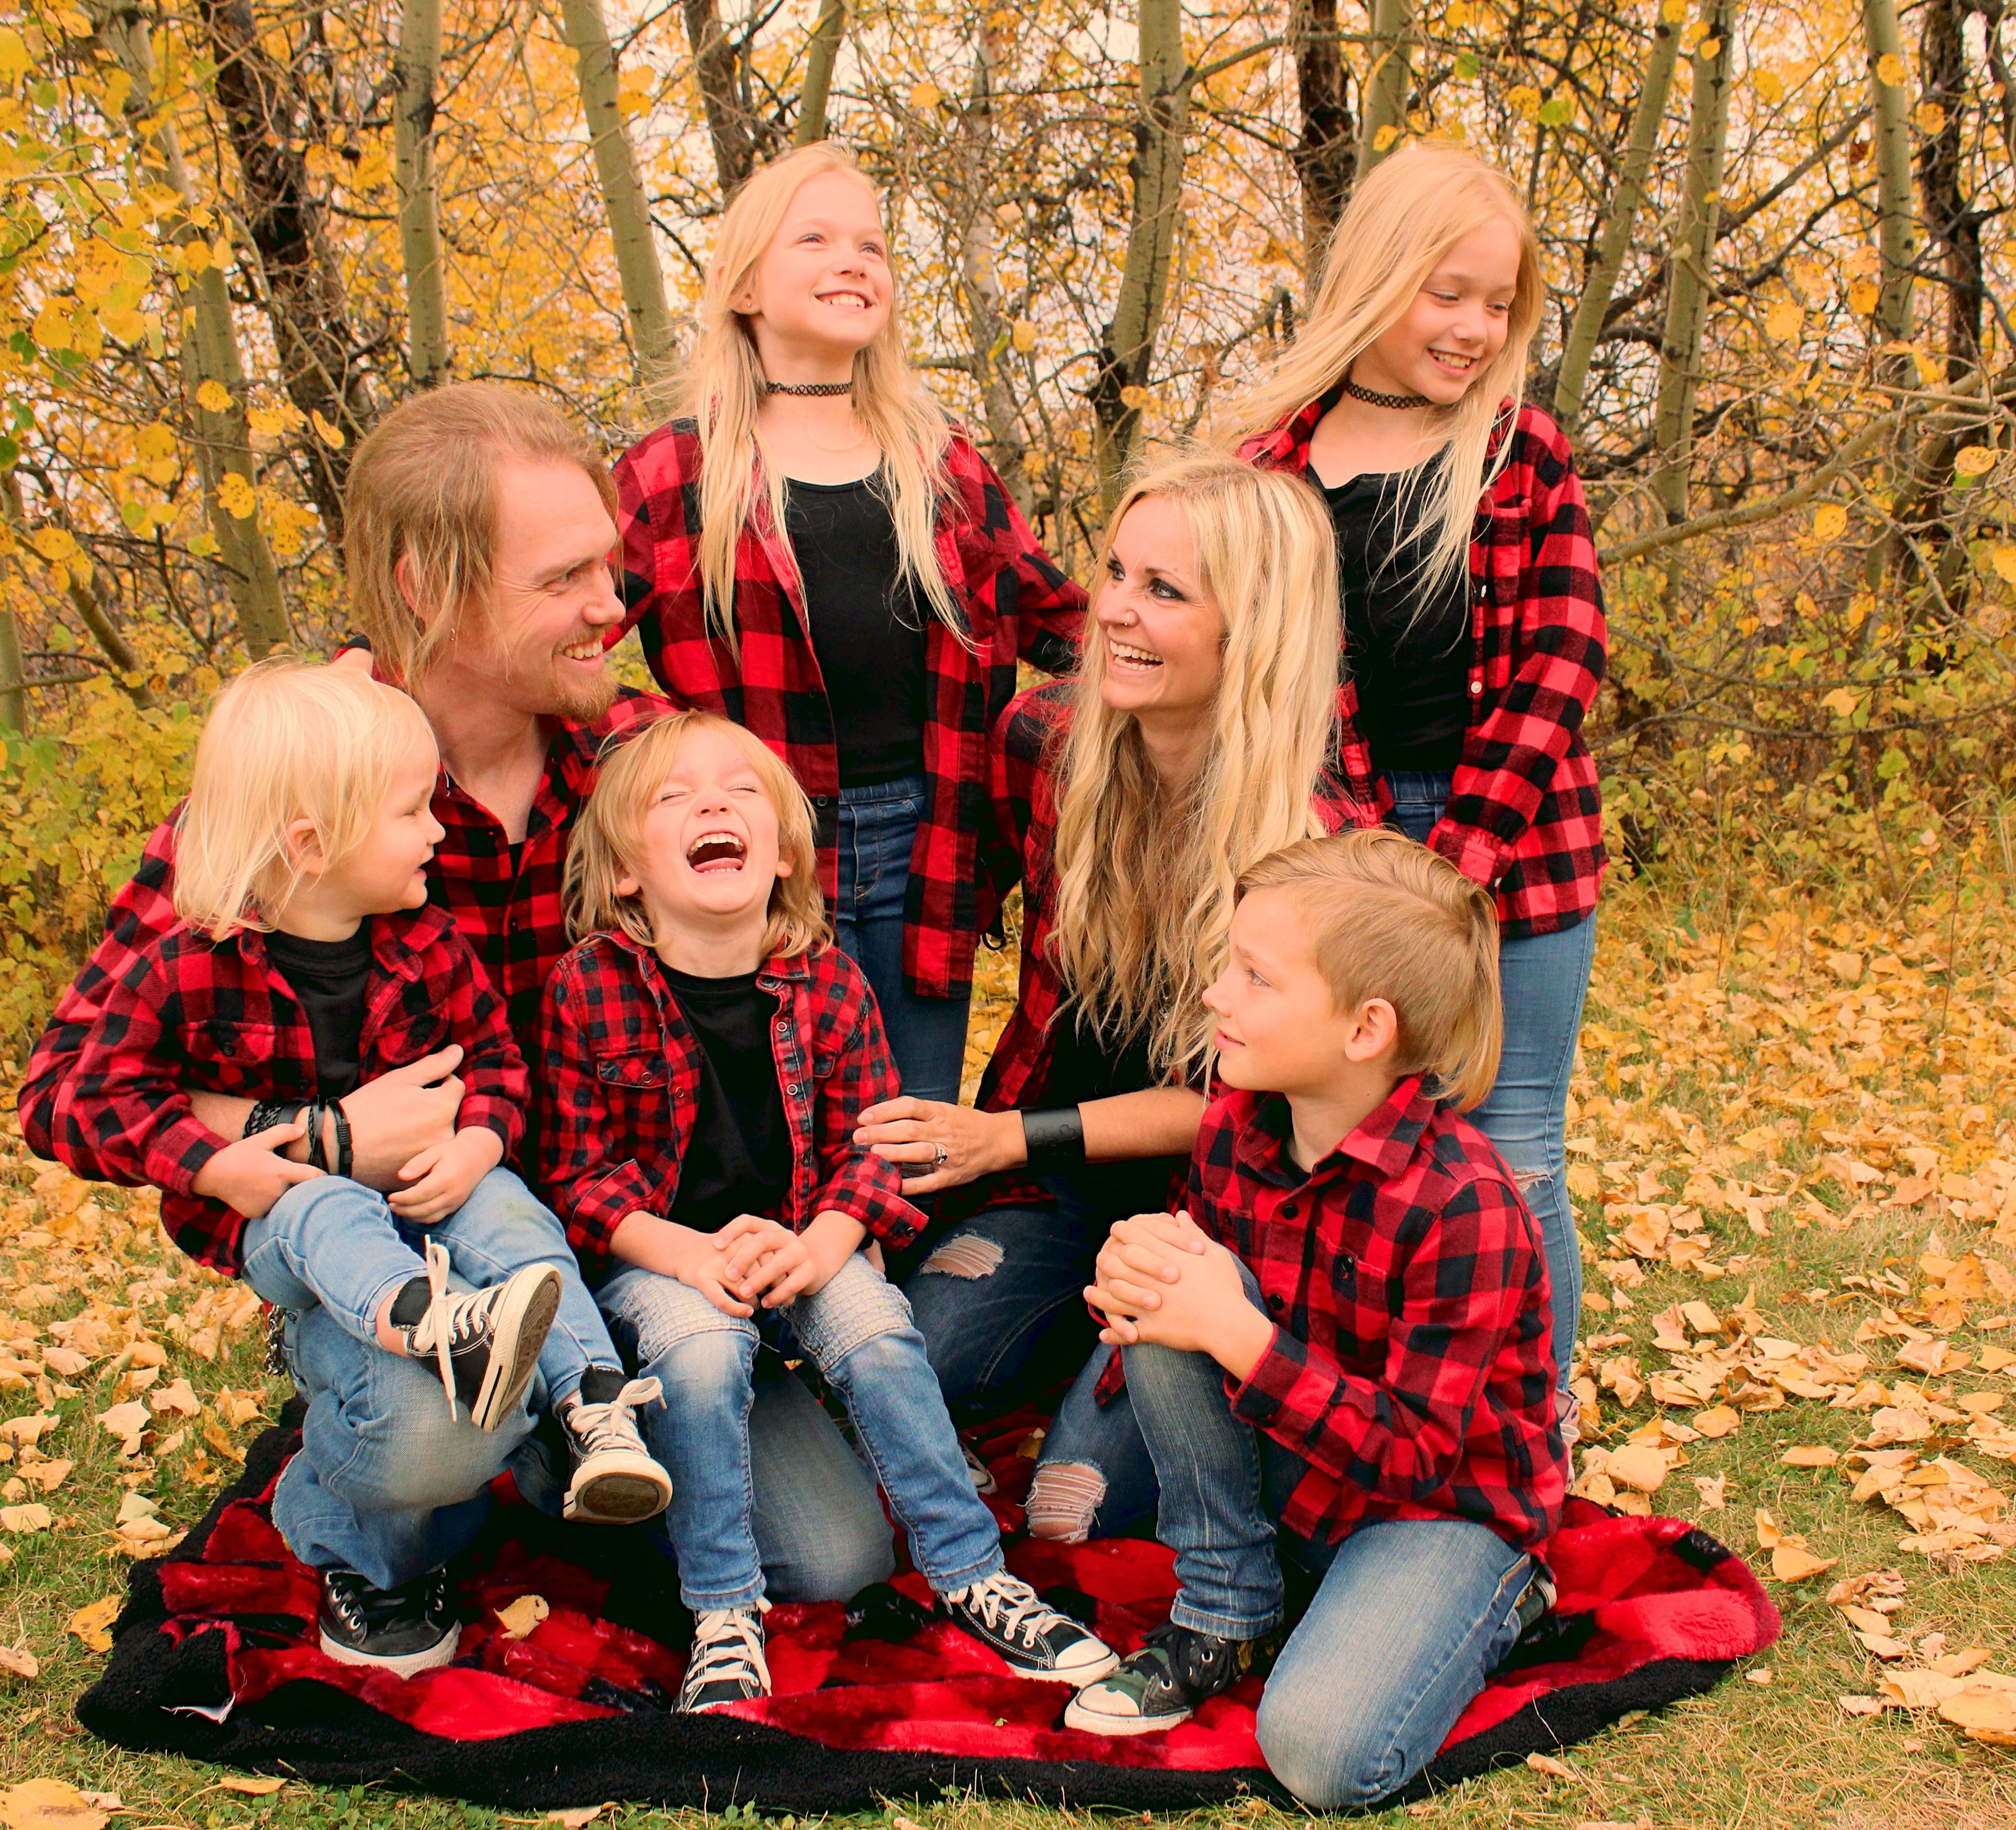 Little boy has the biggest belly laugh as his family tries to pose for a forest shoot